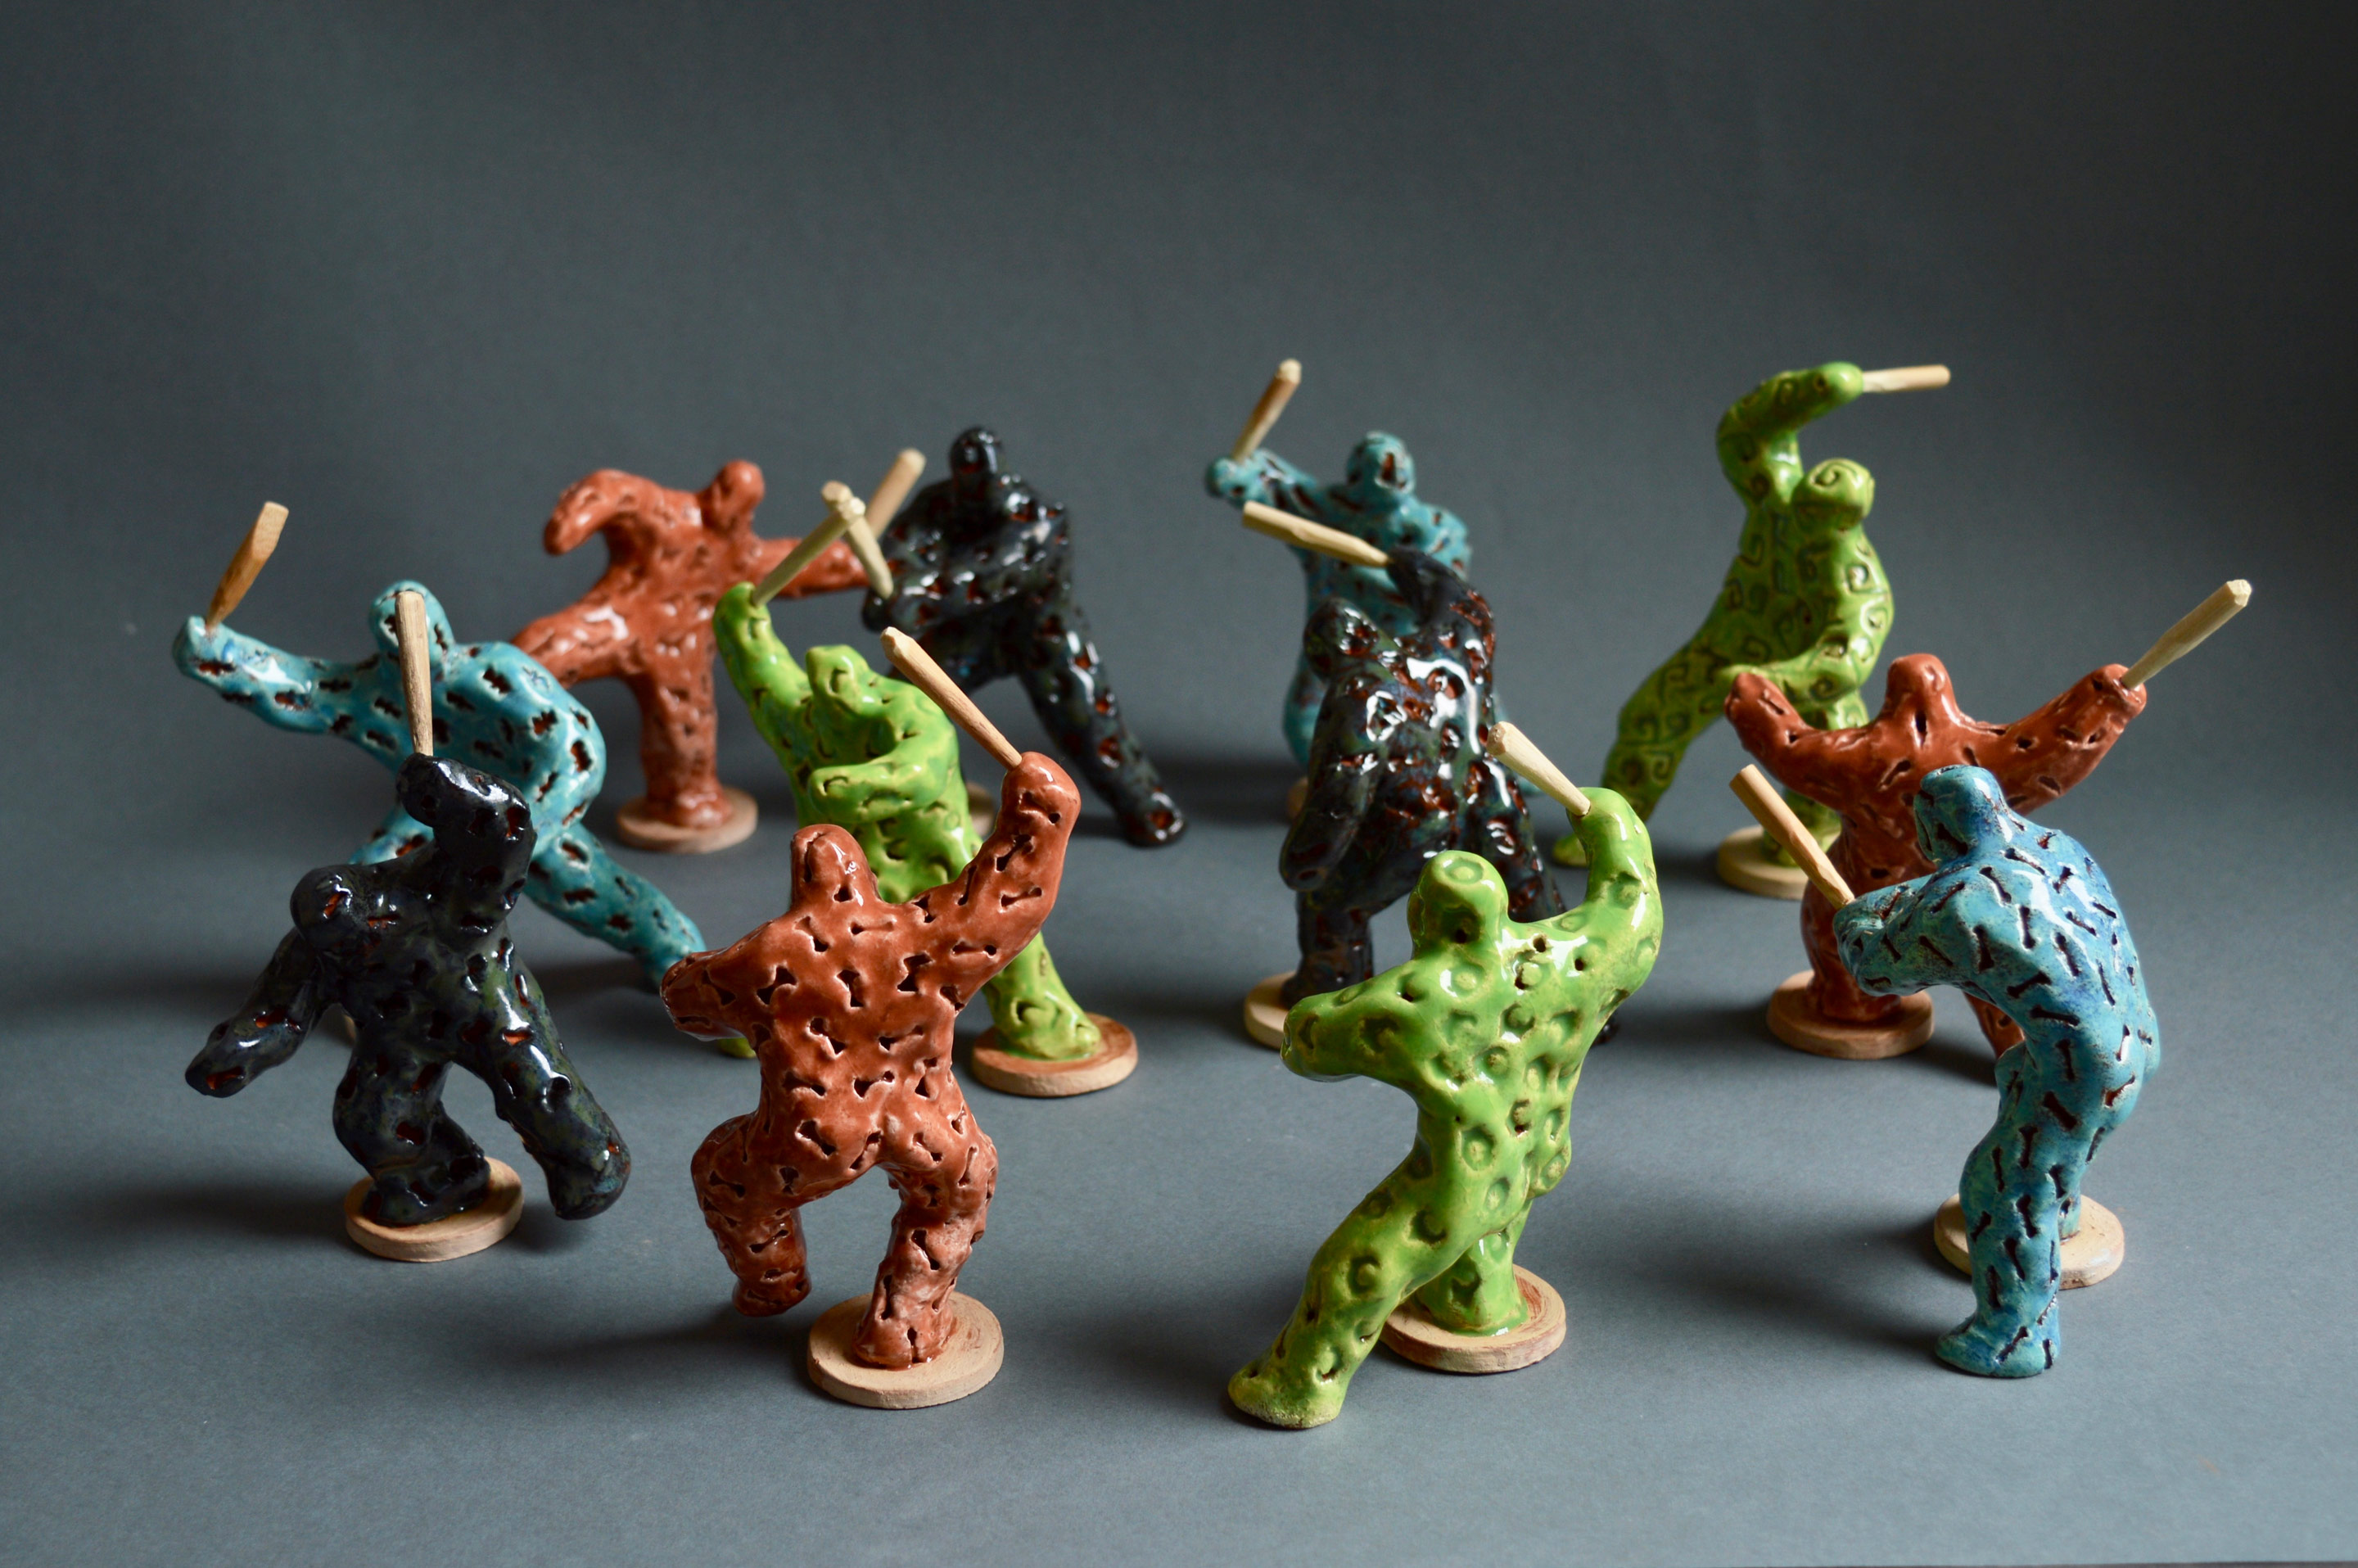 Riot of colour - twelve small coloured figures with clubs, figures about 10cm tall